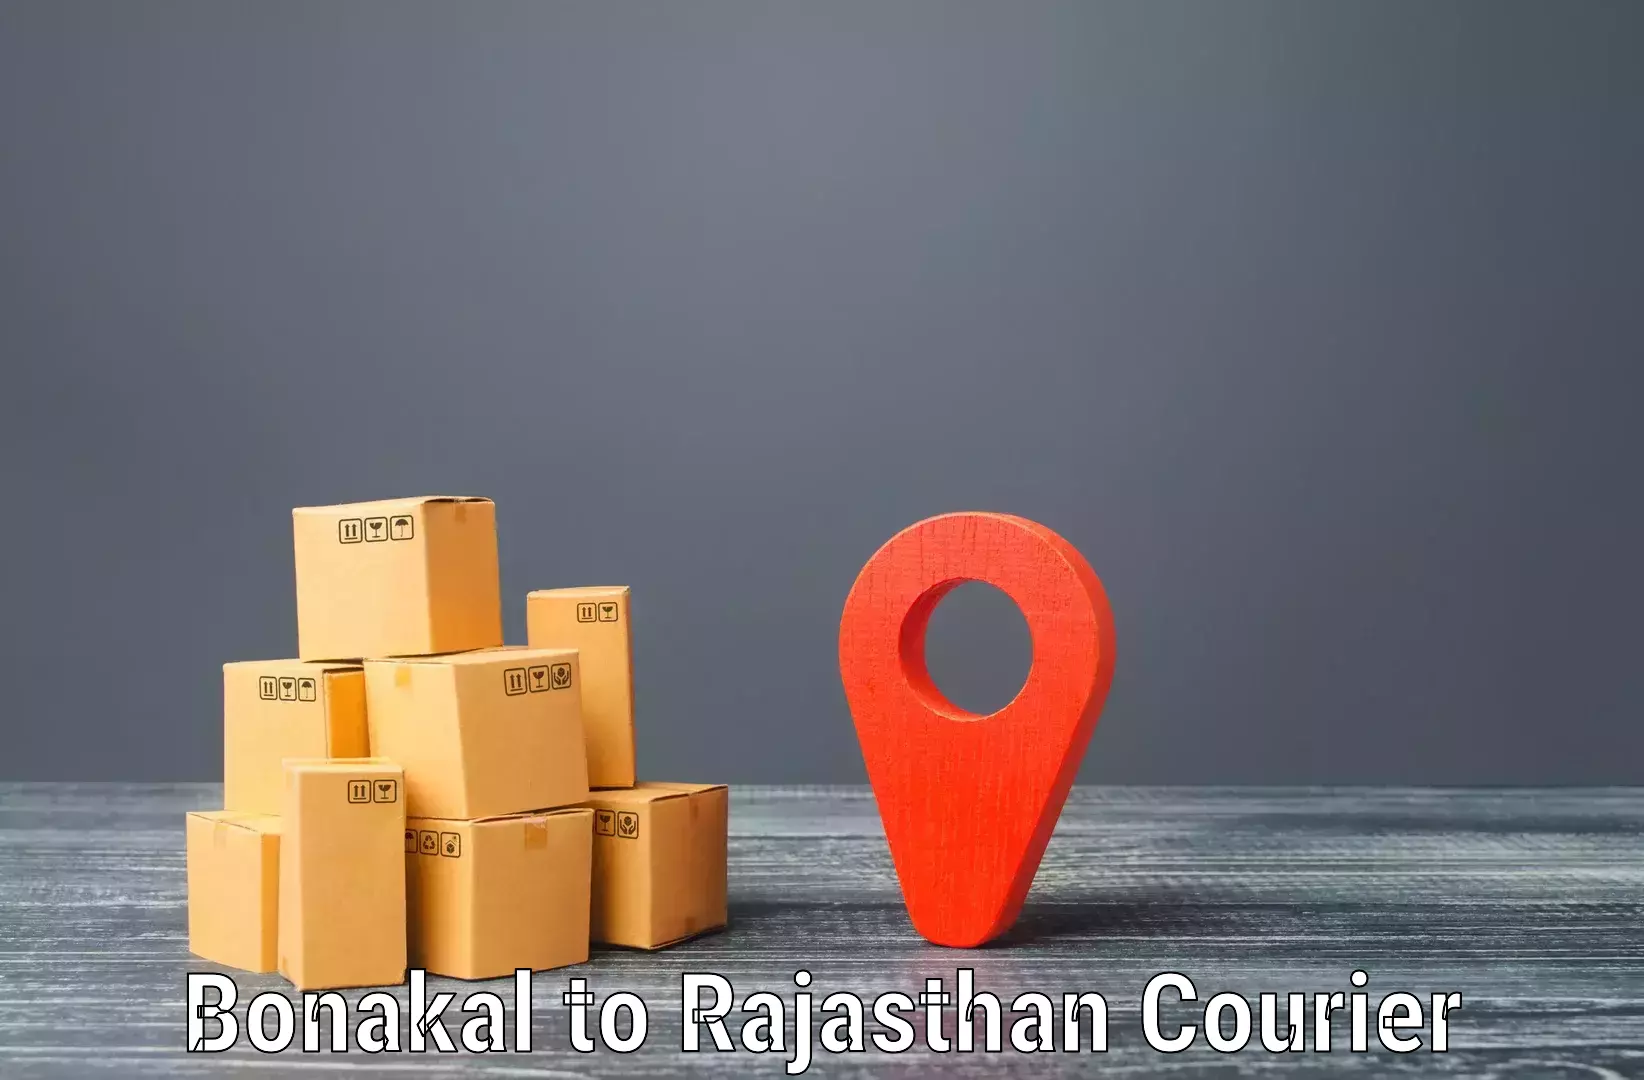 Full-service courier options Bonakal to Pokhran